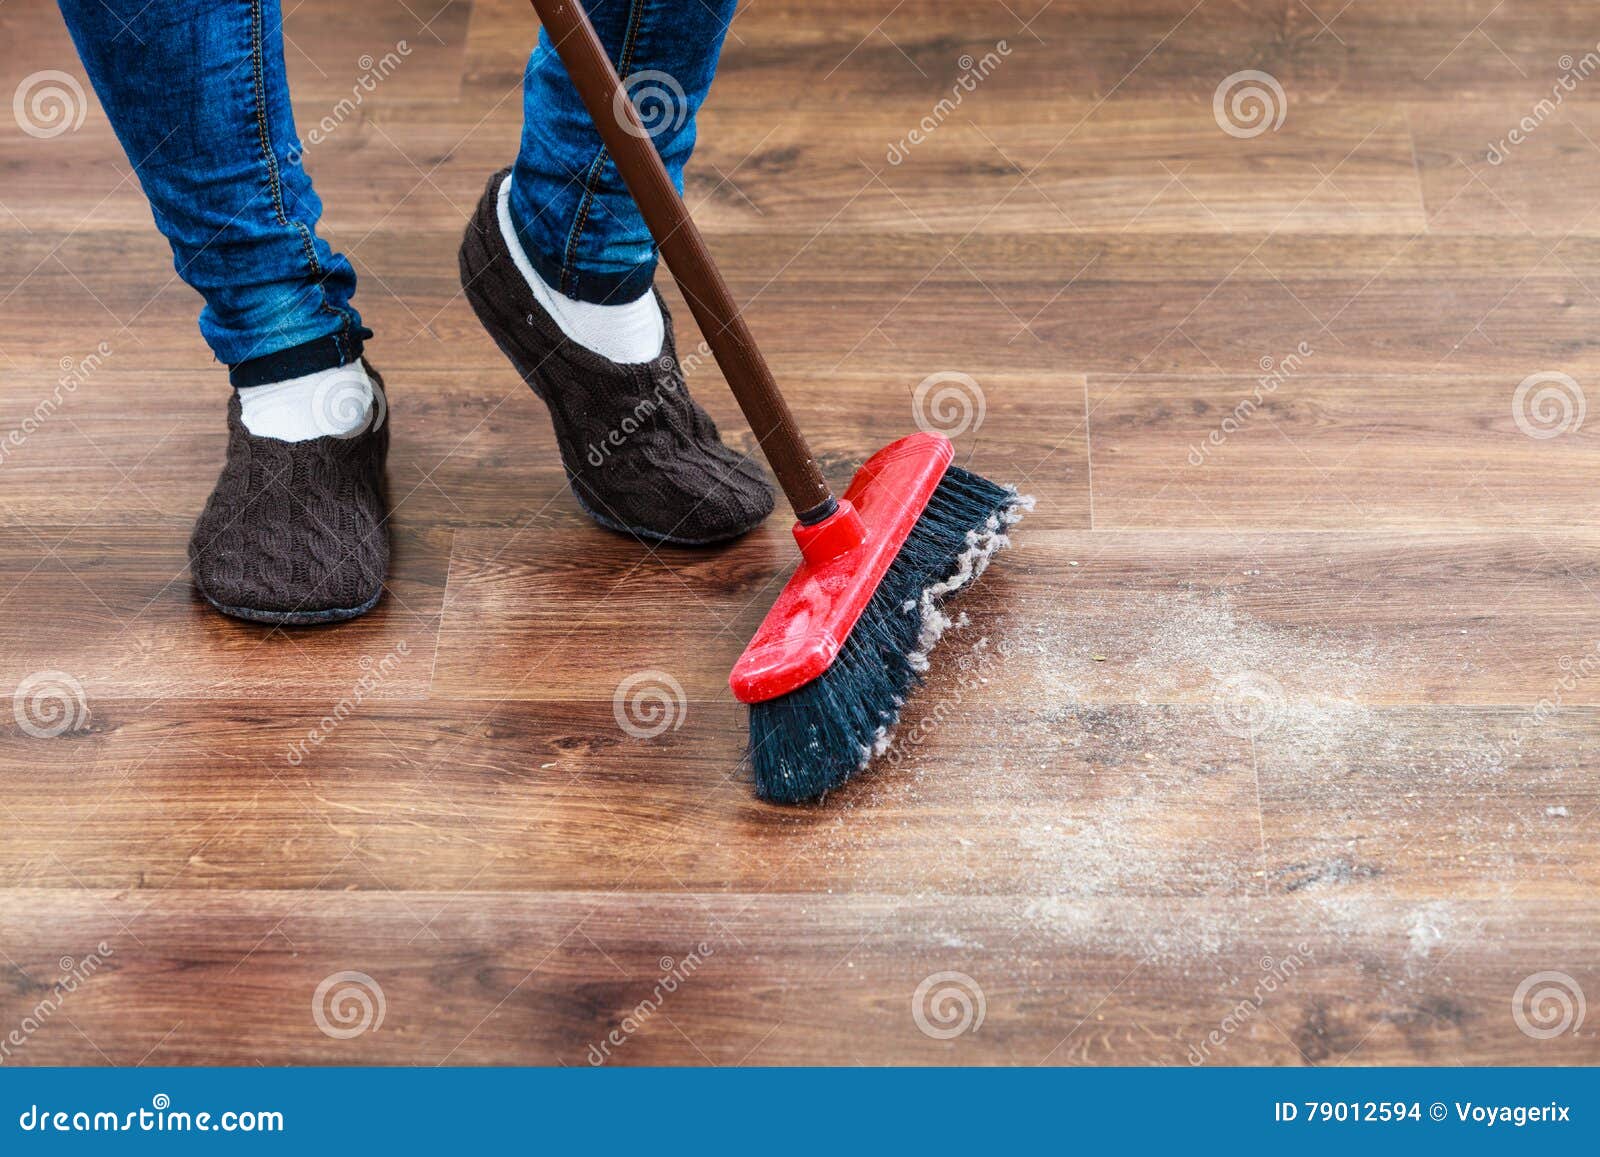 Cleaning Woman Sweeping Wooden Floor Stock Photo Image Of